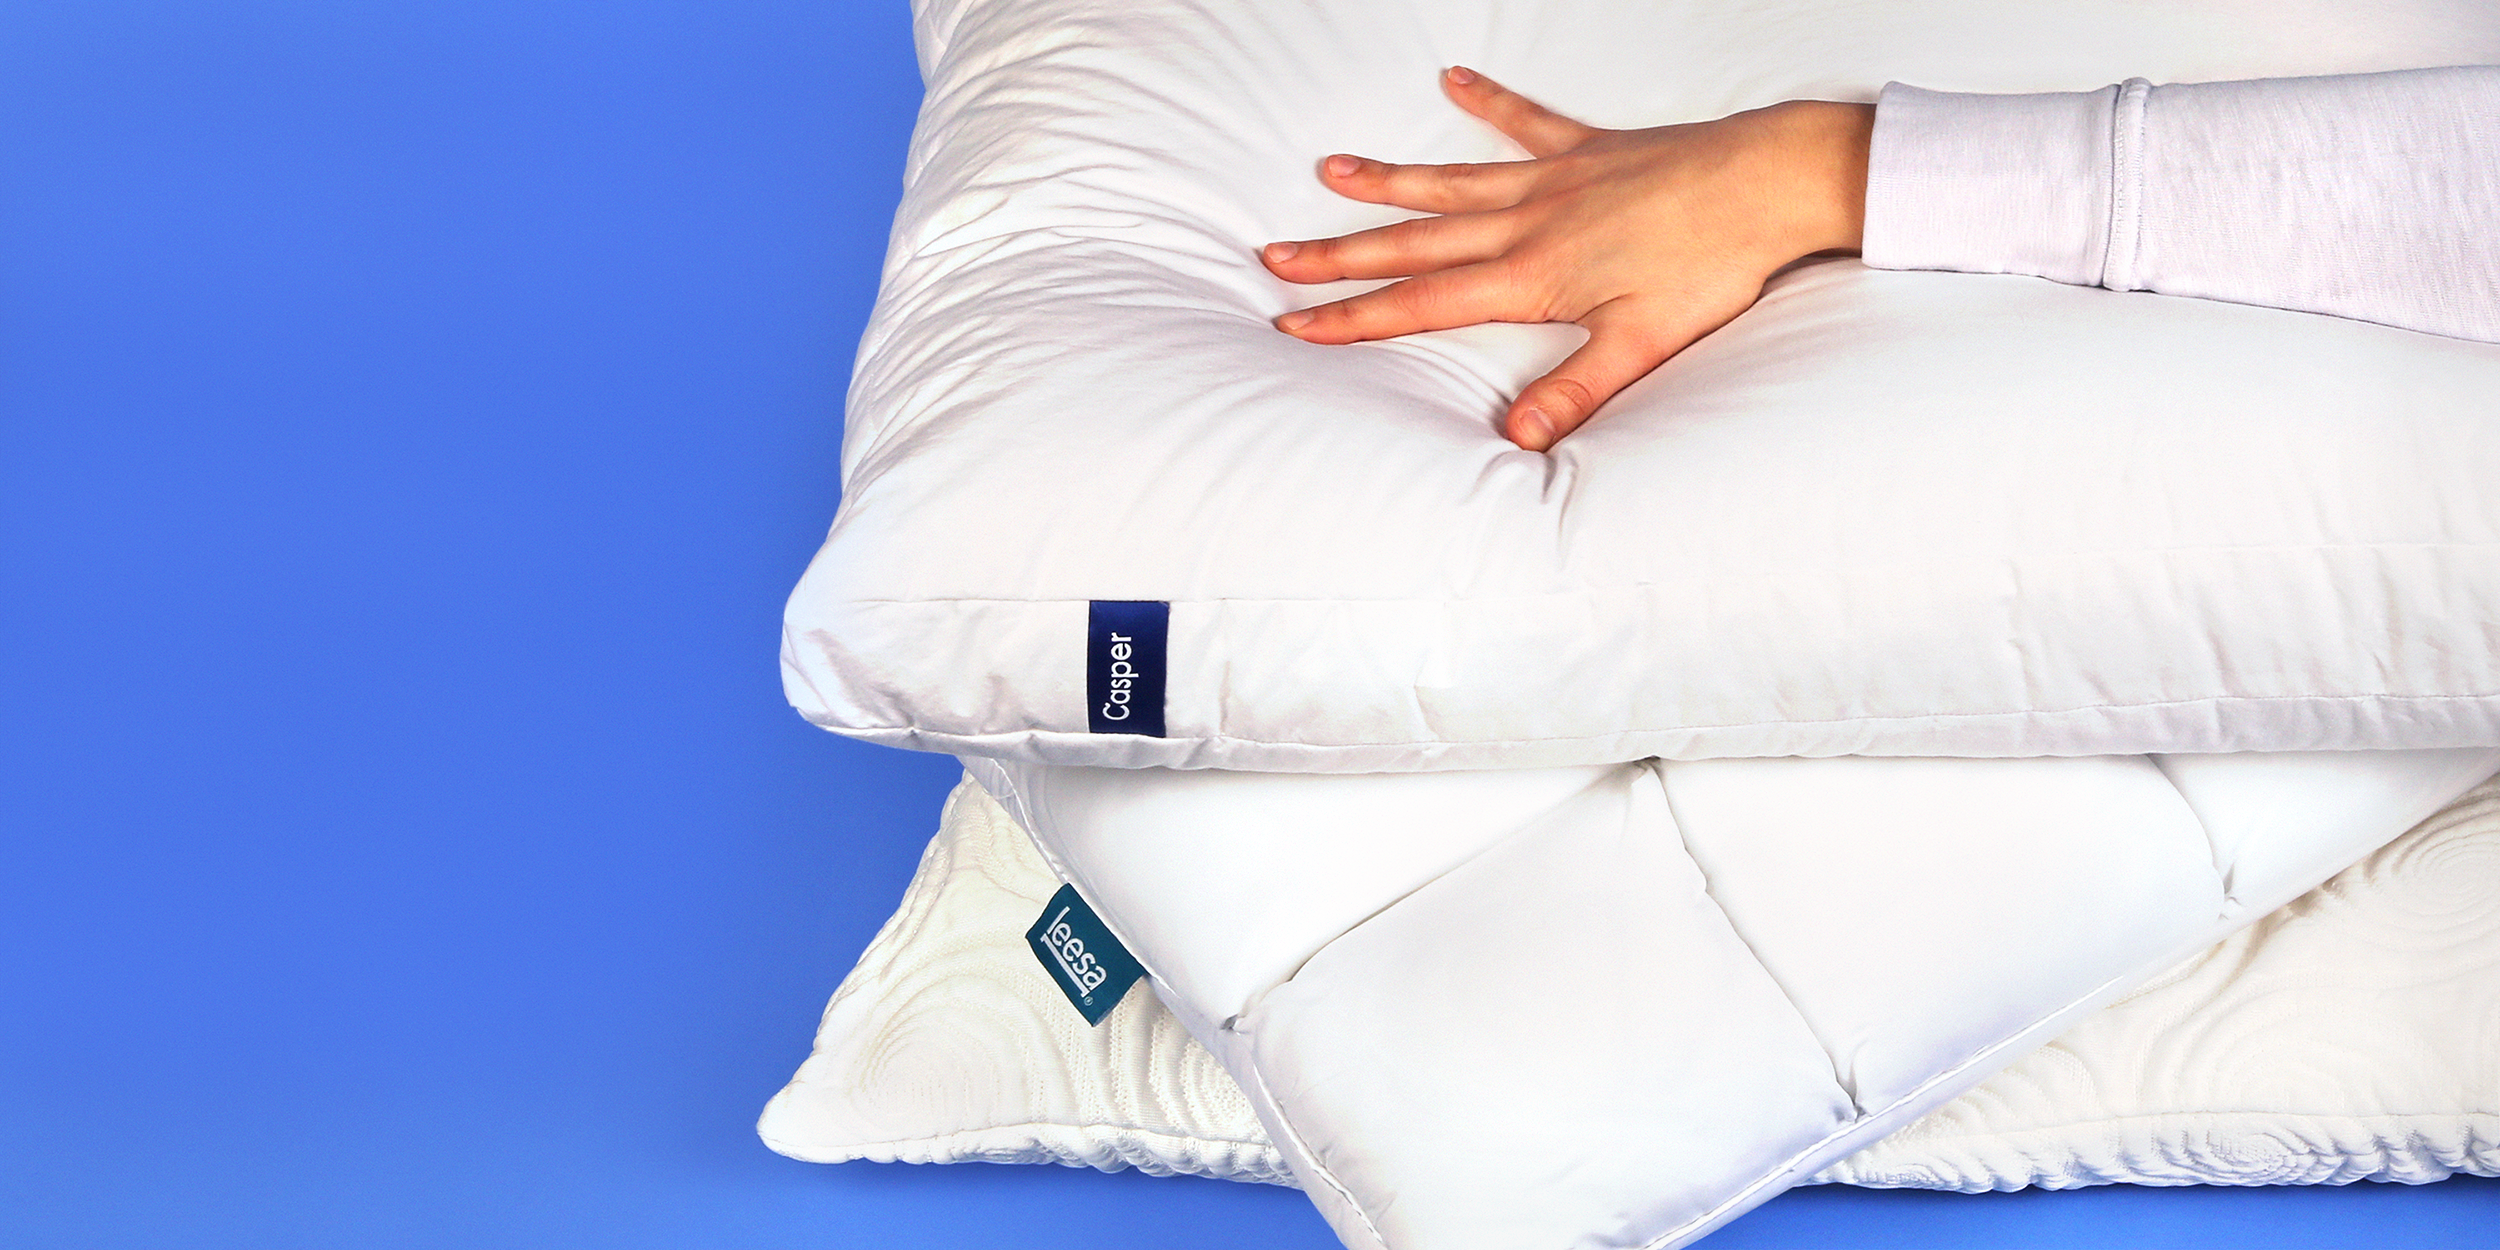 best rated bed pillows